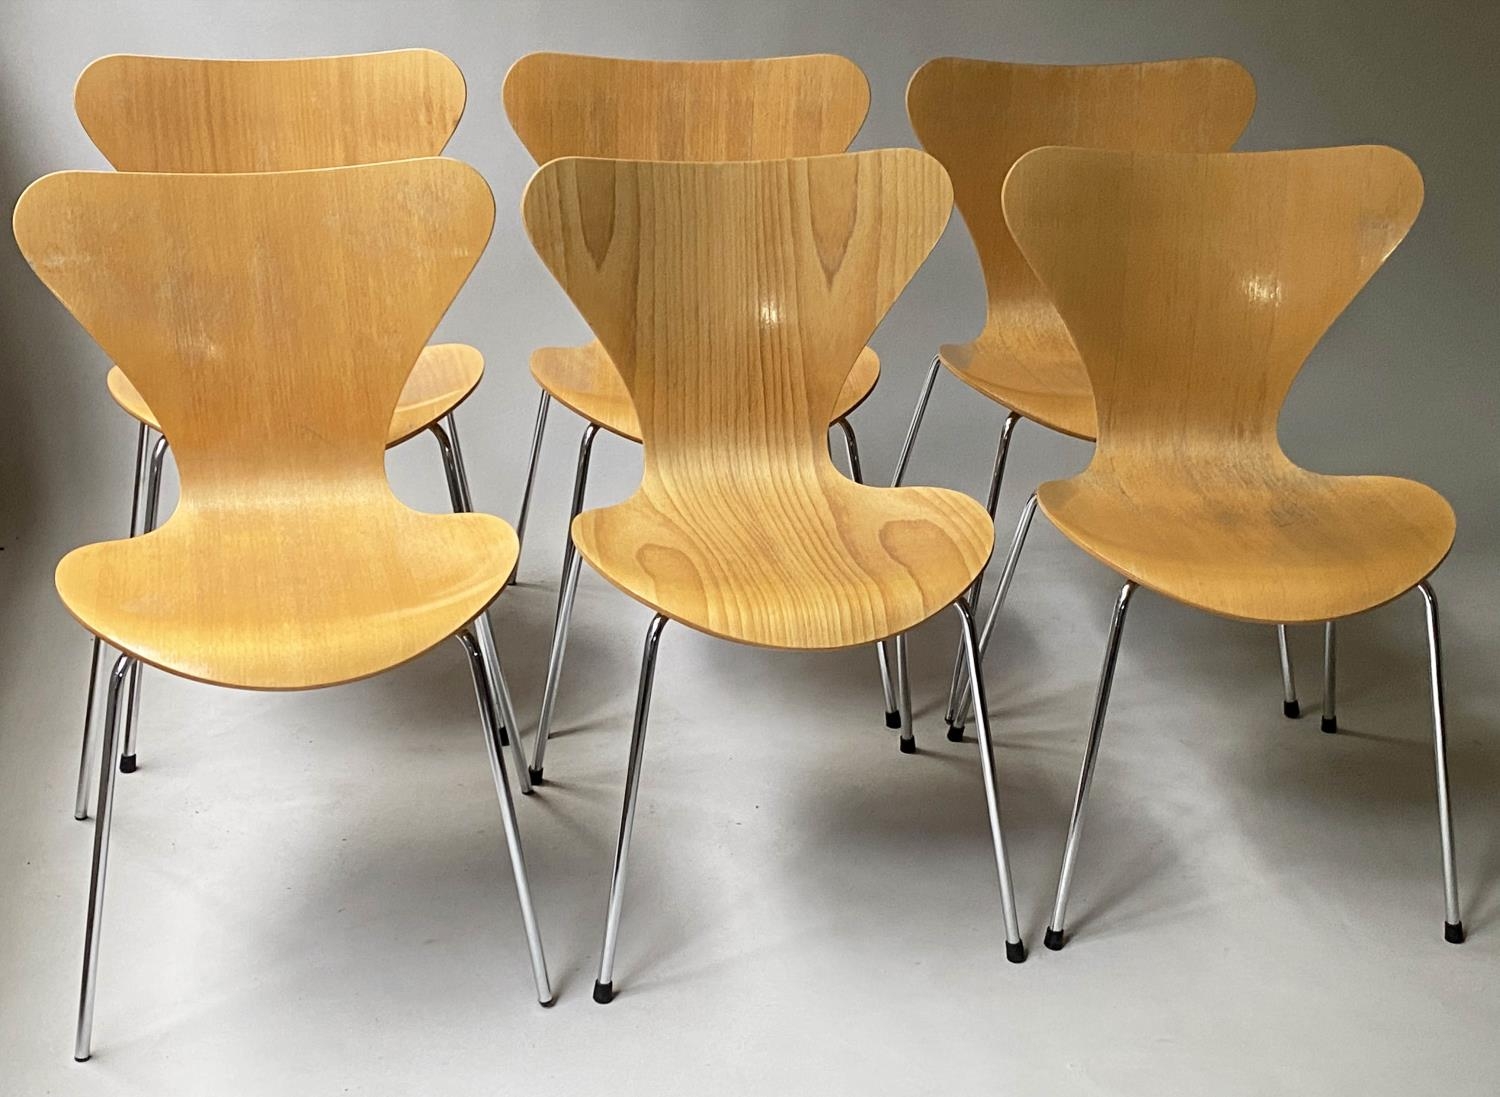 FRITZ HANSEN SERIES 7 DINING CHAIRS, a set of six, by Arne Jacobsen, bentwood and stacking (